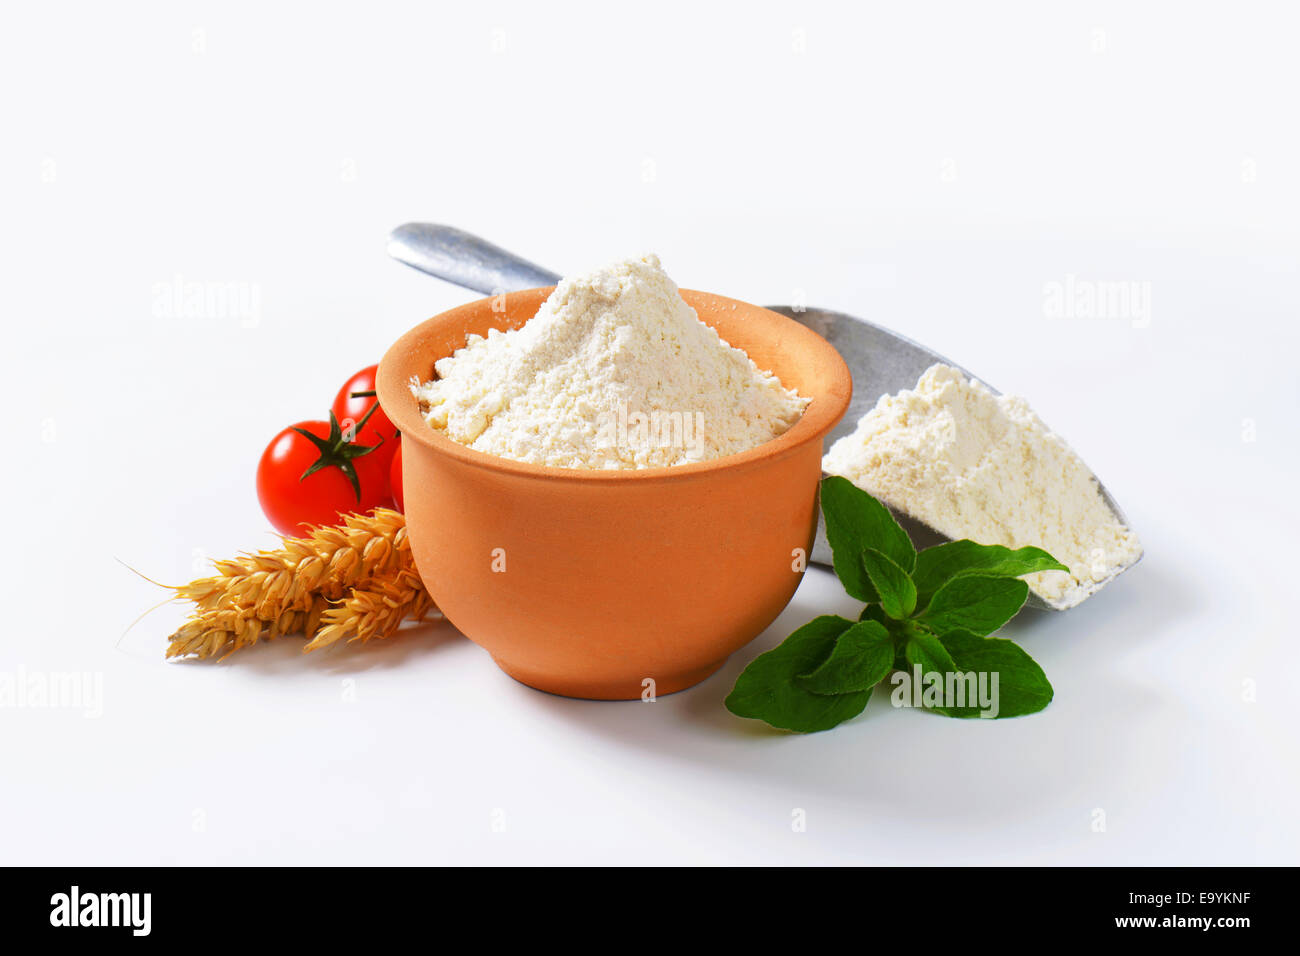 Finely ground flour in terracotta bowl and metal scoop Stock Photo